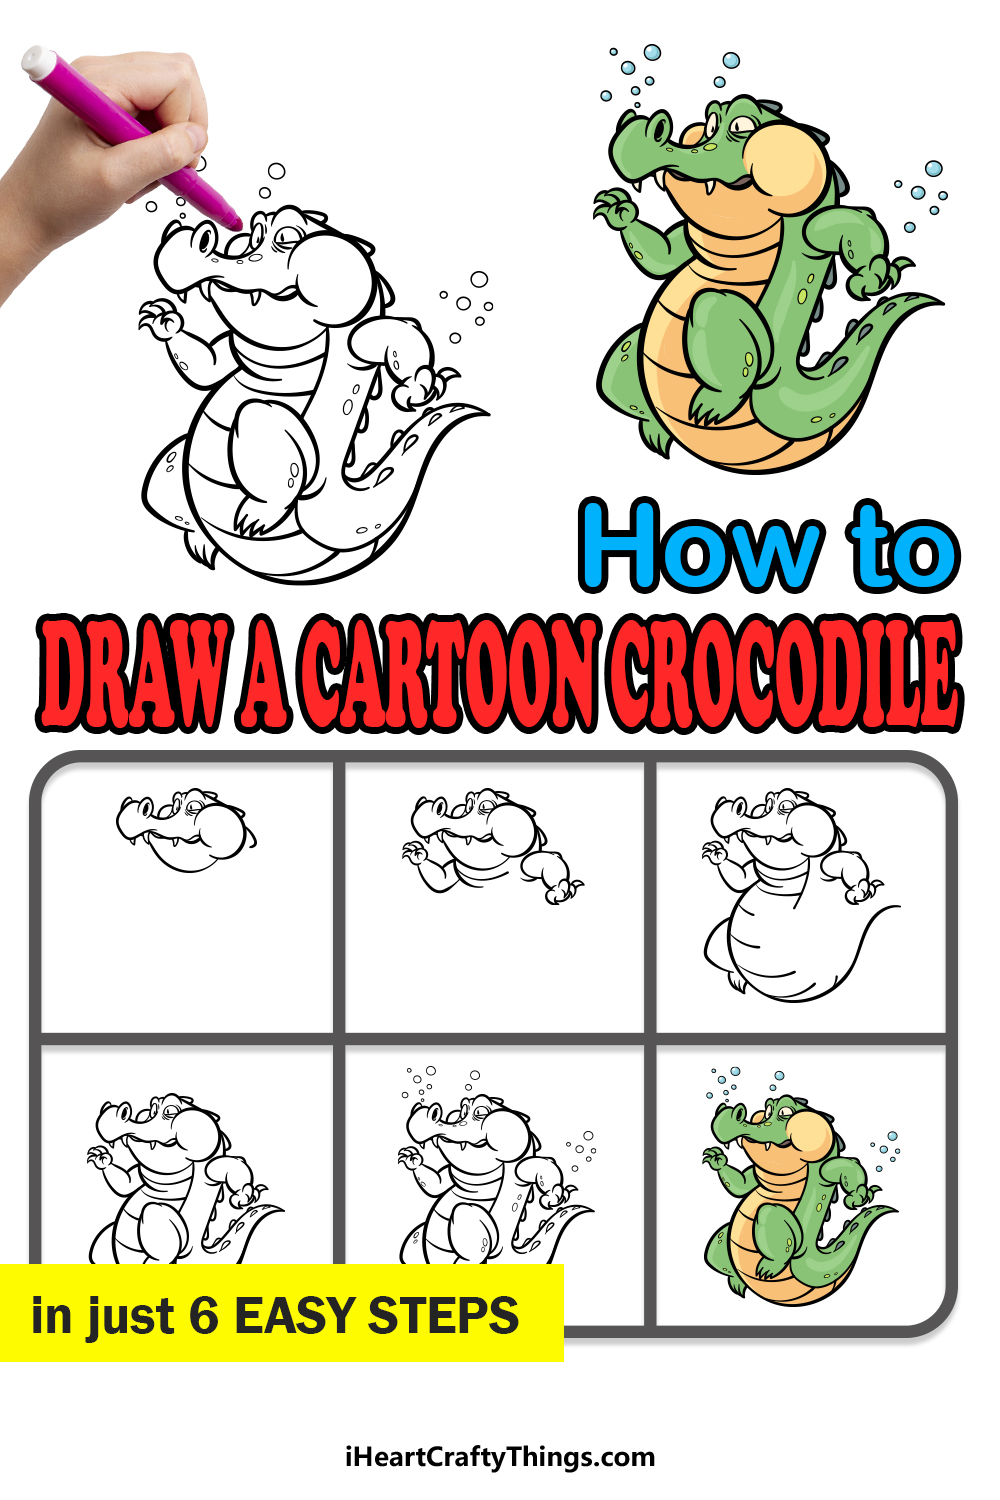 how to draw a cartoon crocodile in 6 easy steps